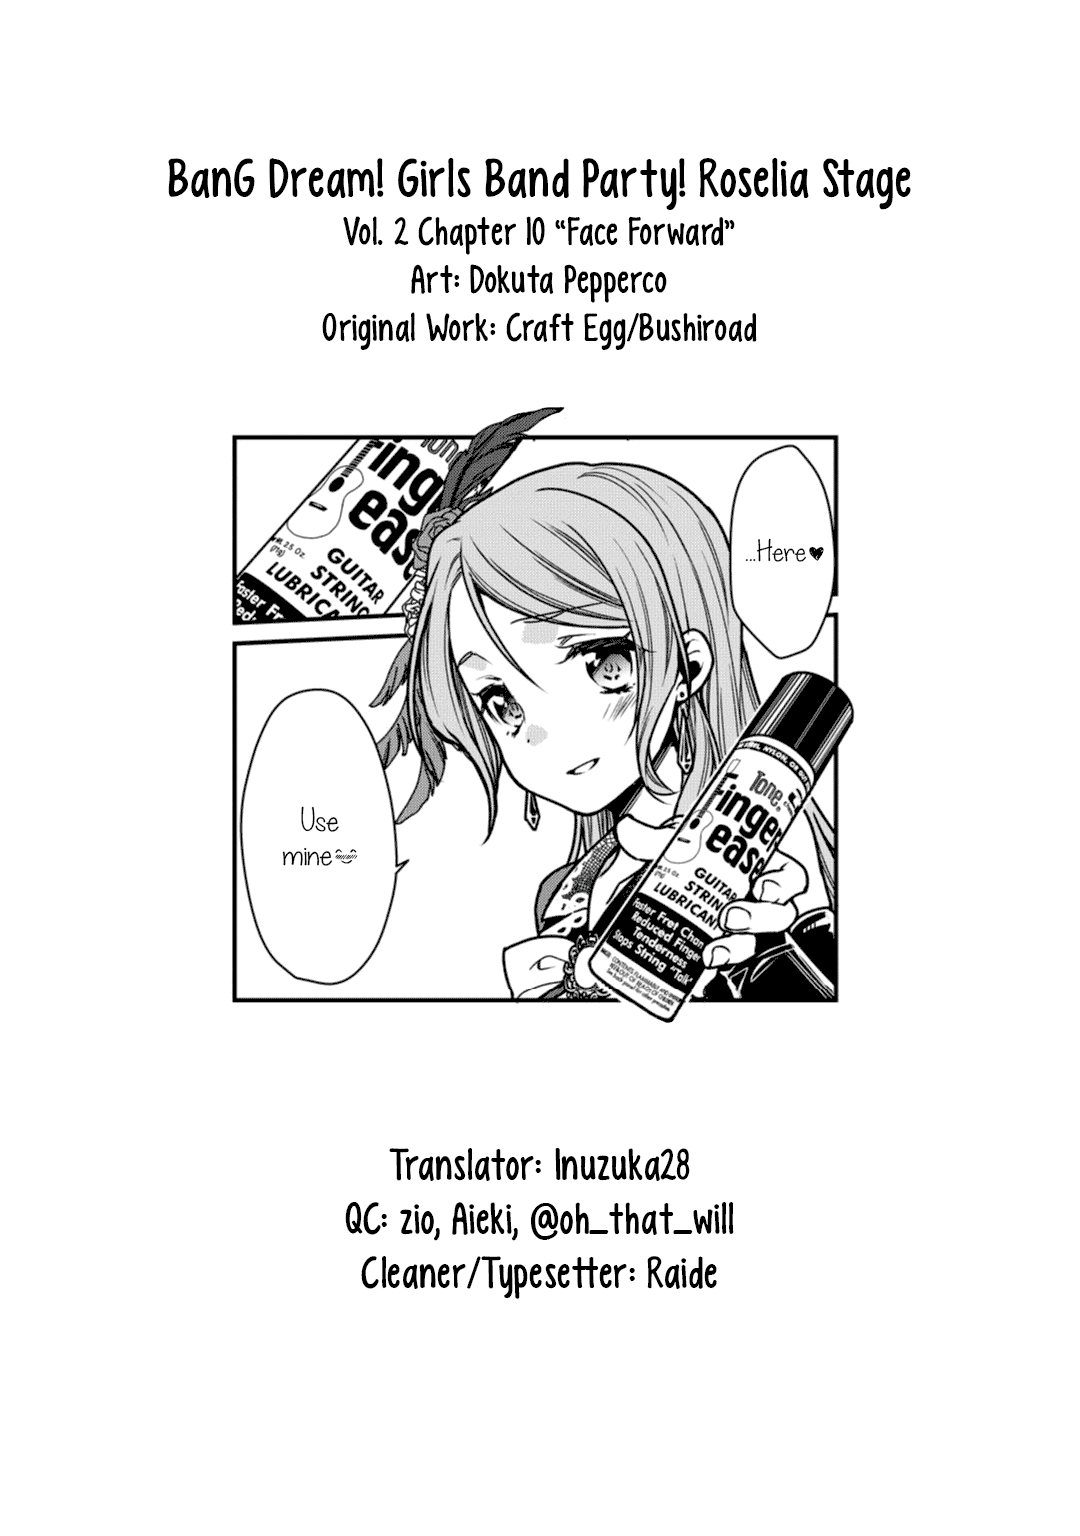 BanG Dream! Girls Band Party! Roselia Stage Vol. 2 Ch. 10 Face Forward